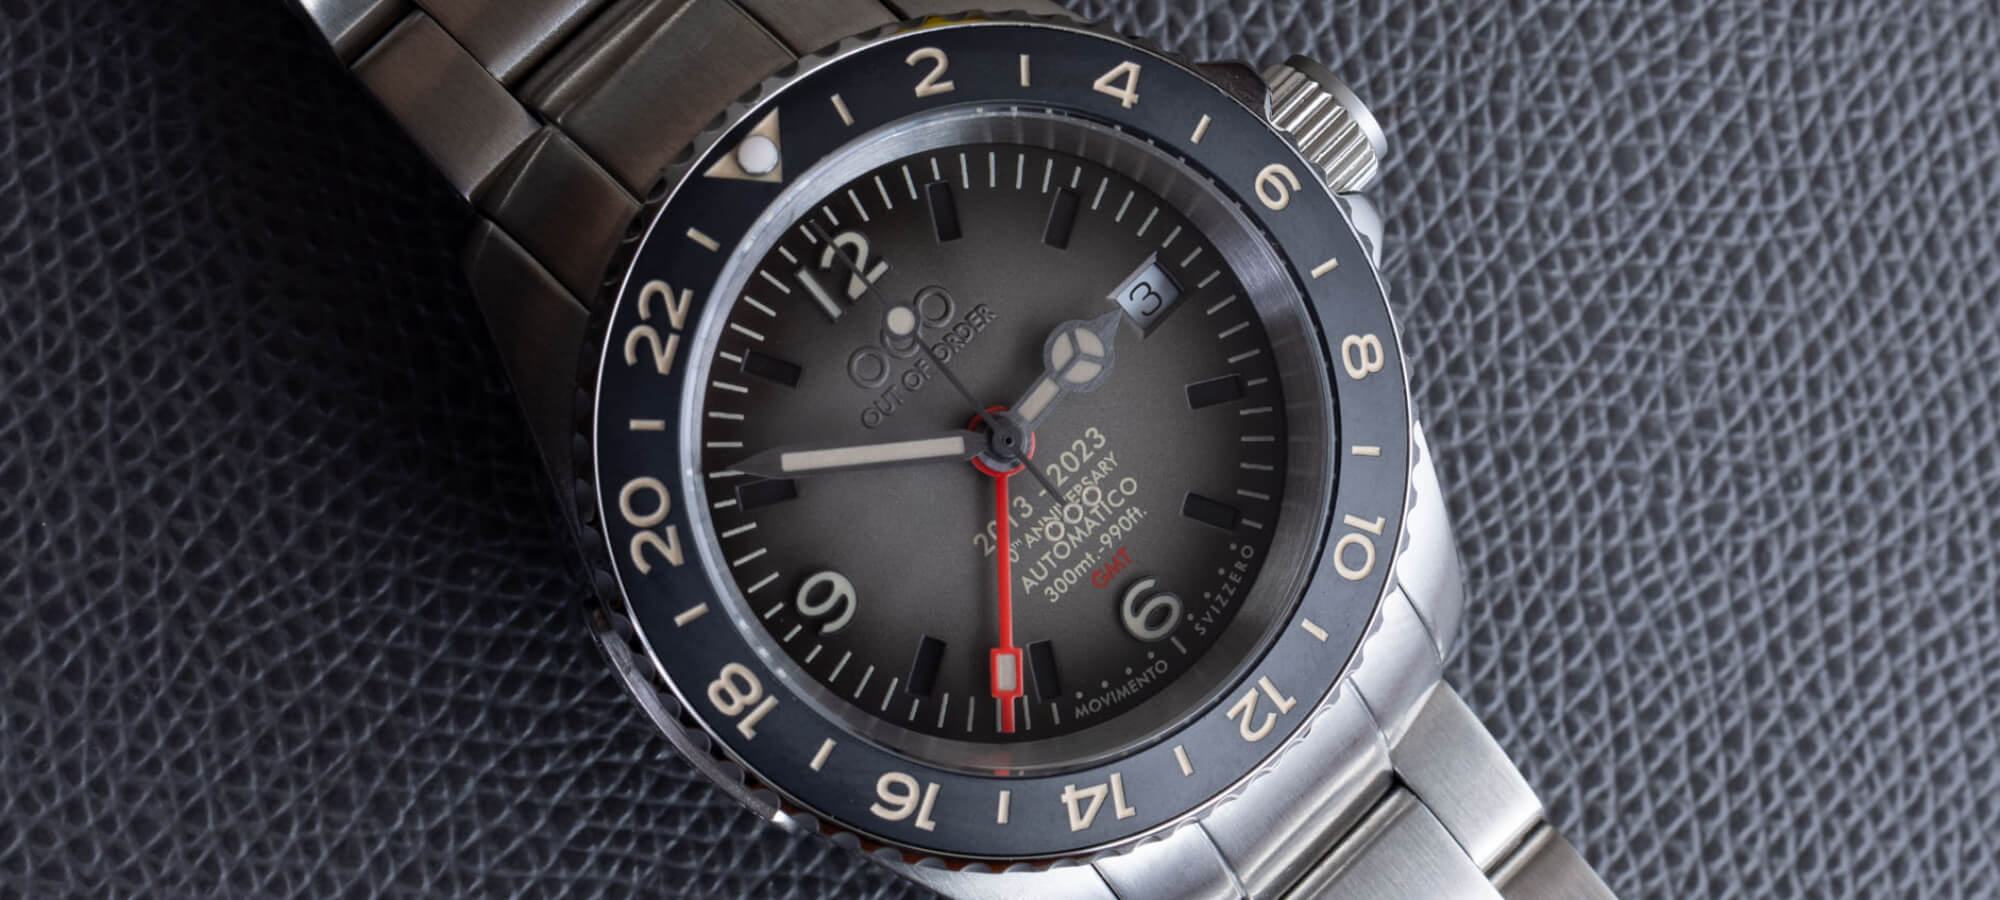 Watch Review: Out Of Order (OOO) 10th Anniversary Ultra Brushed GMT | aBlogtoWatch